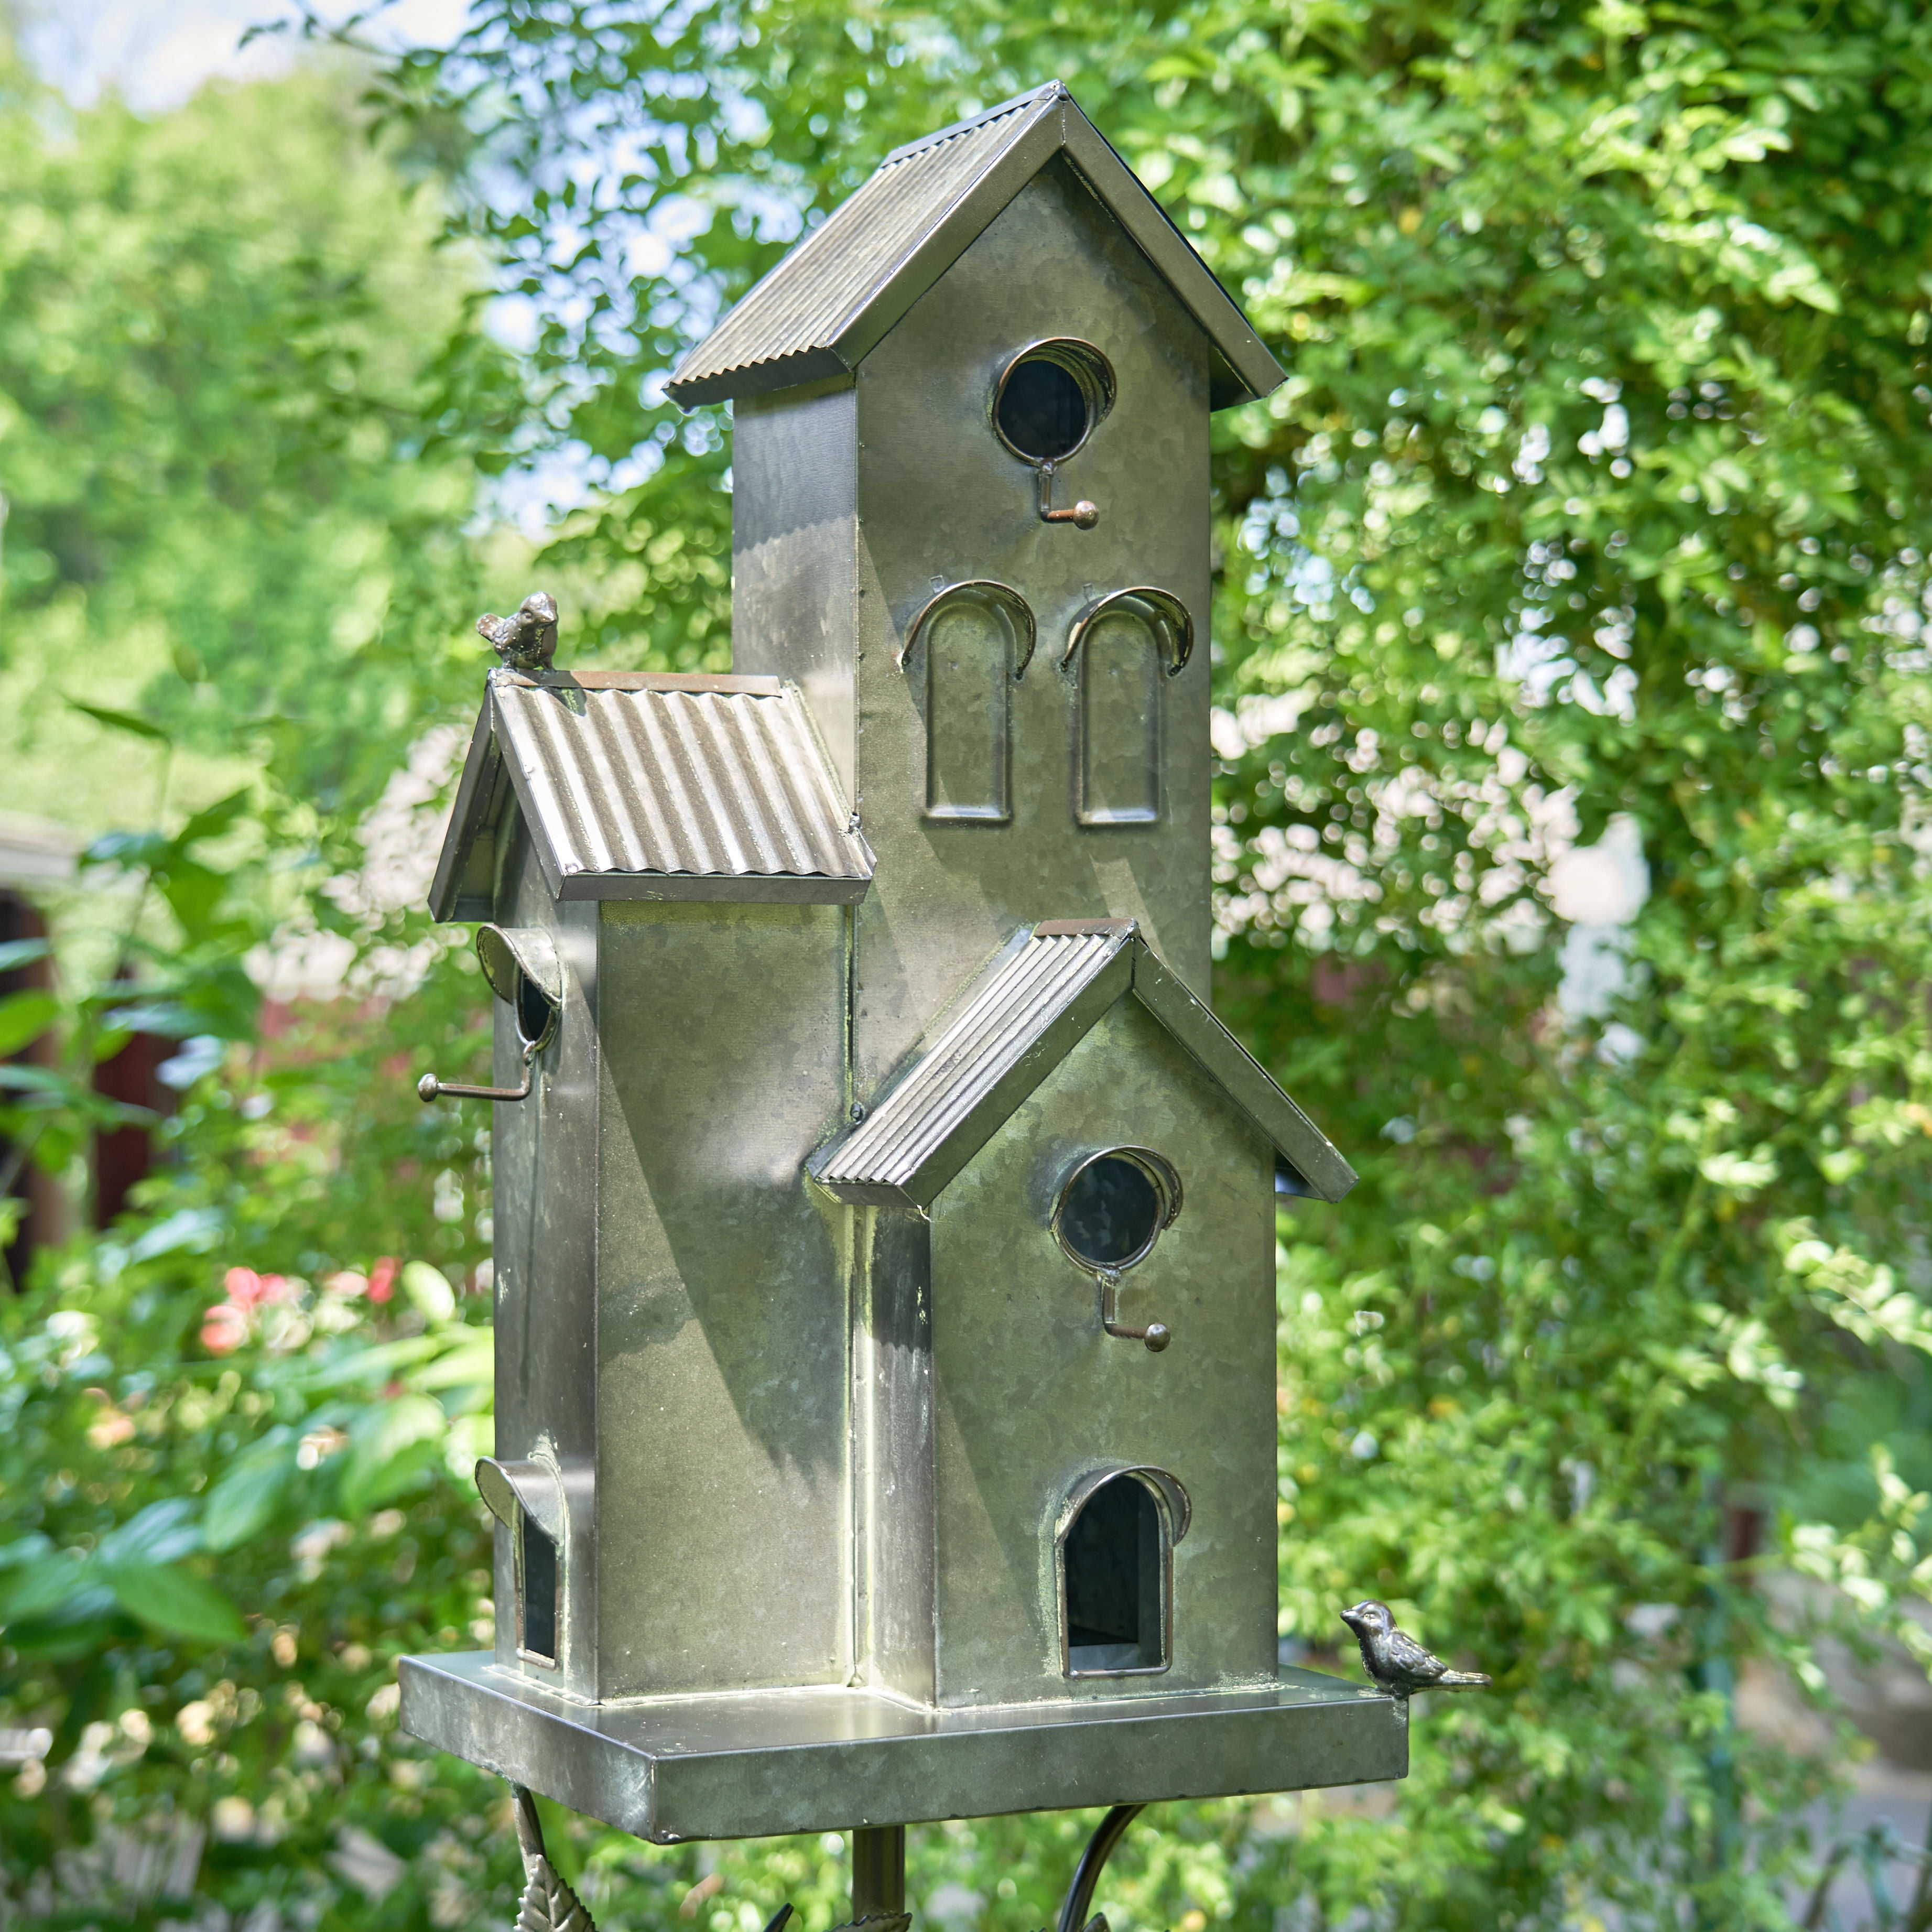 Room for 4 Bird Families in Each Zaer Ltd Cube Homes with Pyramid Roofs Large Copper Colored Multi-Birdhouse Stakes